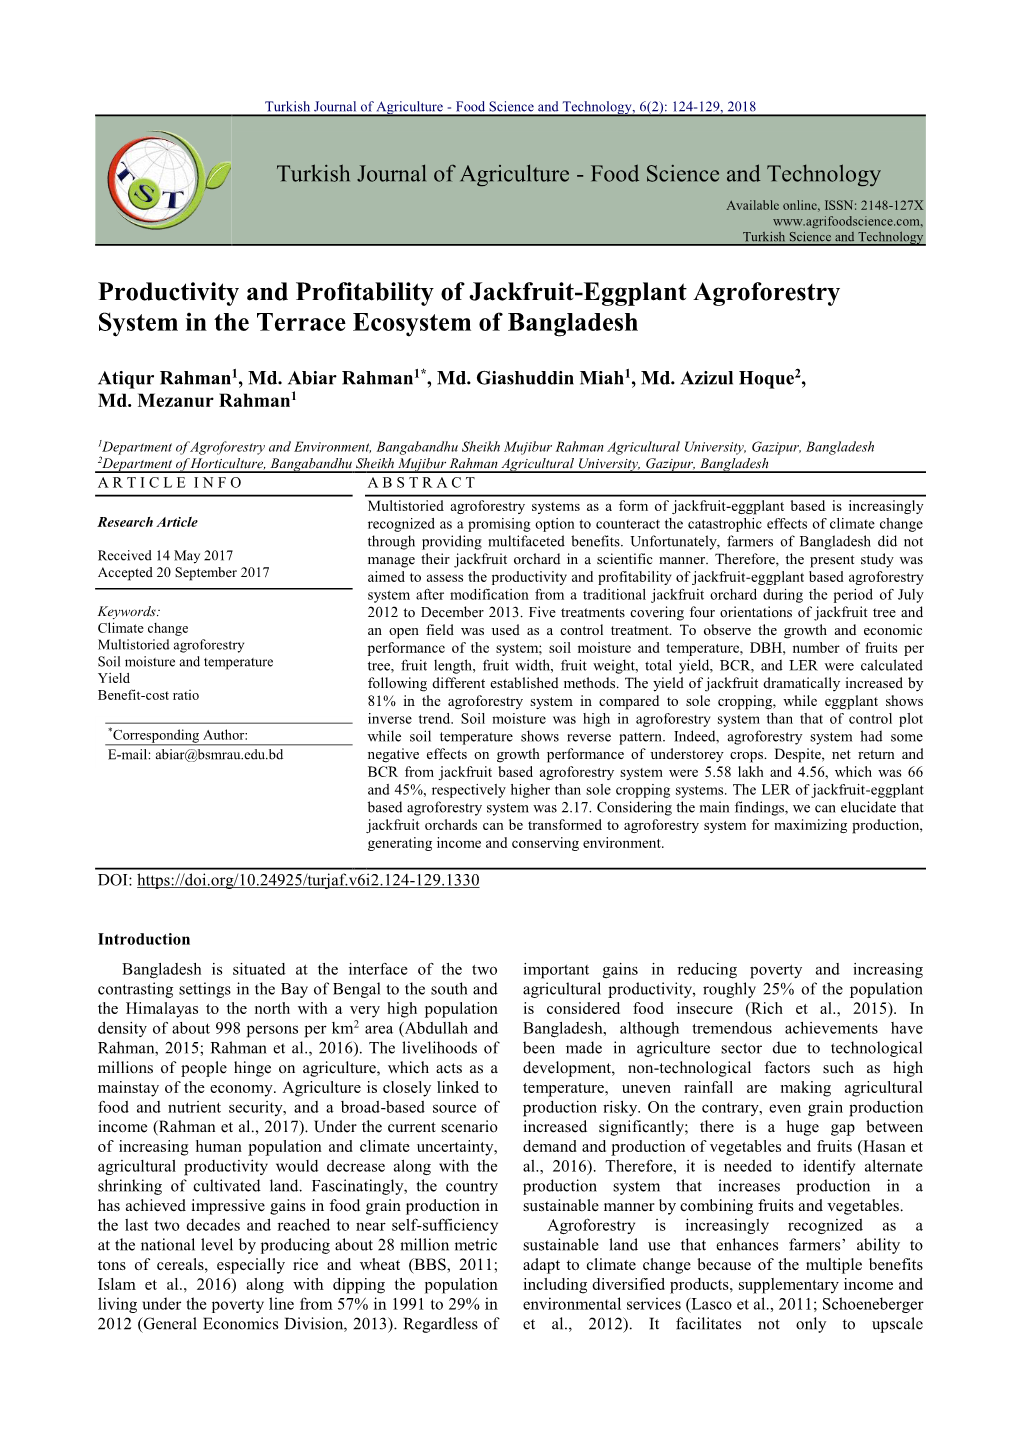 Productivity and Profitability of Jackfruit-Eggplant Agroforestry System in the Terrace Ecosystem of Bangladesh